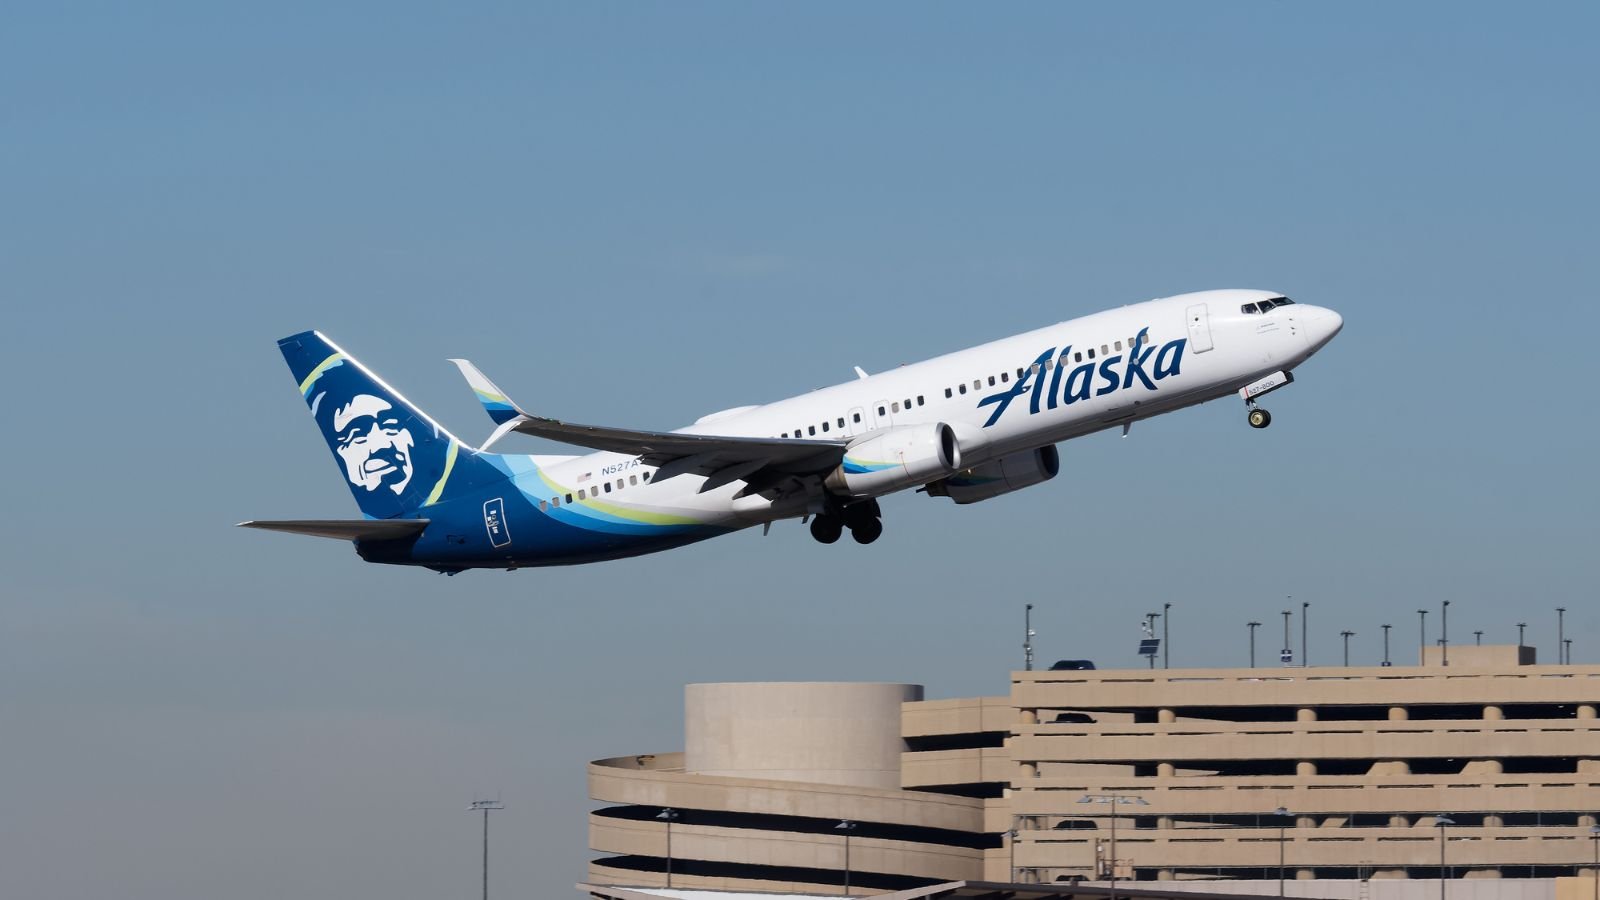 <p>Alaska ranked first and was recommended as the “best airline overall.” They plan to expand their reach and aim to grow 4%-8% annually until 2025.</p> <p>Their focus is on customer satisfaction and also emphasizes their core values like safety, integrity, performance, and kindness. They cater to over 120 destinations, and their smooth travel experience attracts the flyers to return every time.</p> <p>It had a score of 68.07 as per the<a href="https://wallethub.com/edu/best-airlines/20916" rel="noopener"> Wallethub </a>ranking.</p>